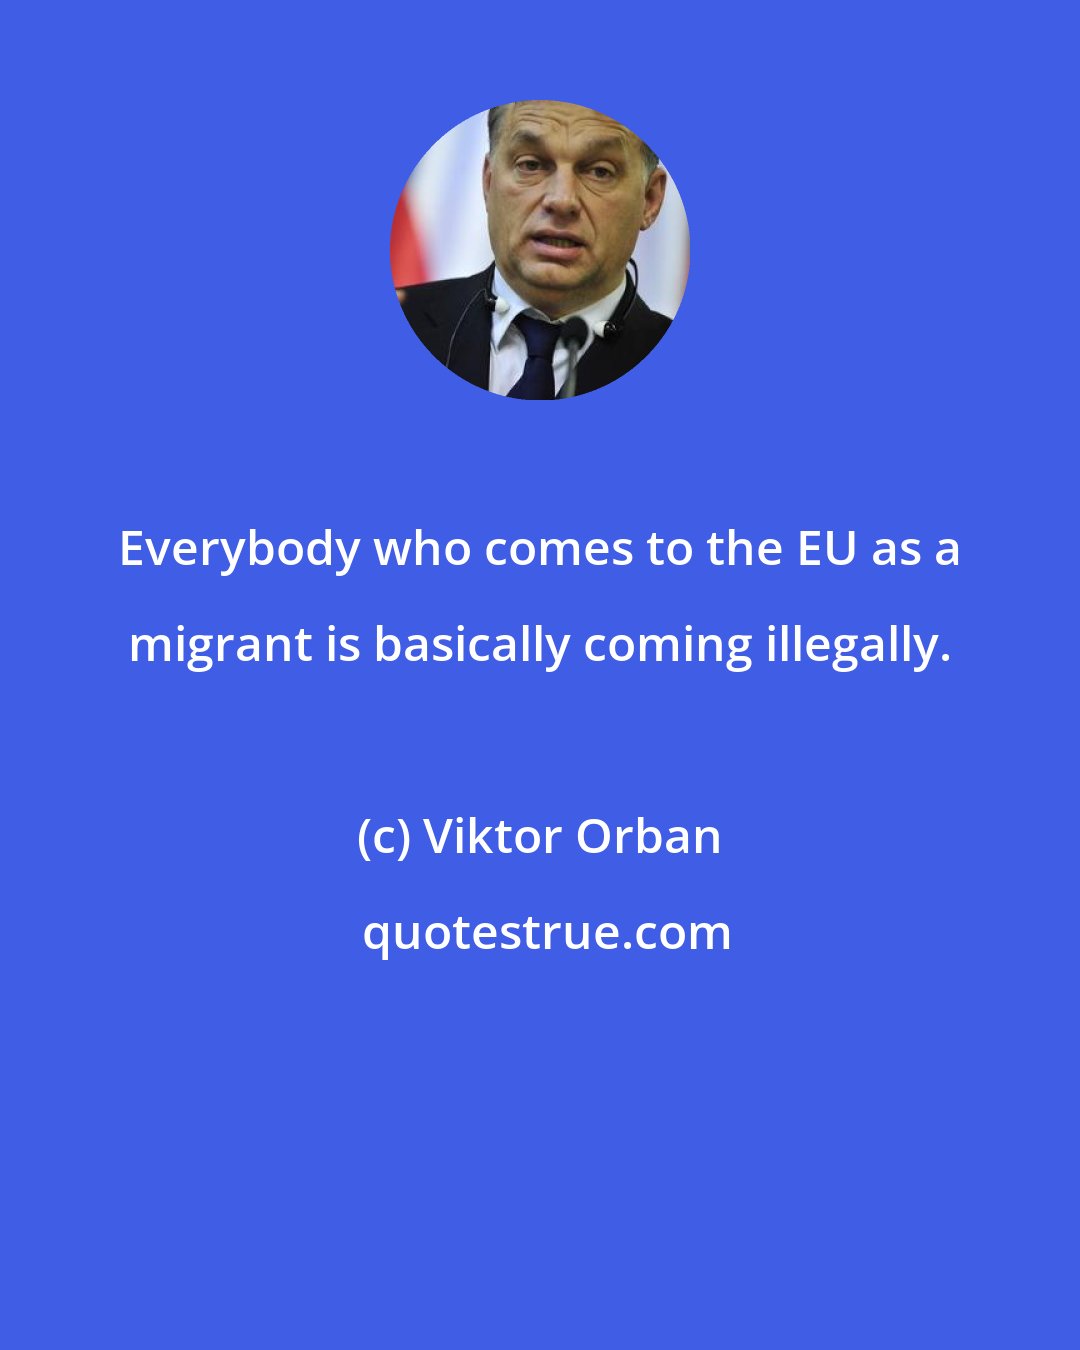 Viktor Orban: Everybody who comes to the EU as a migrant is basically coming illegally.